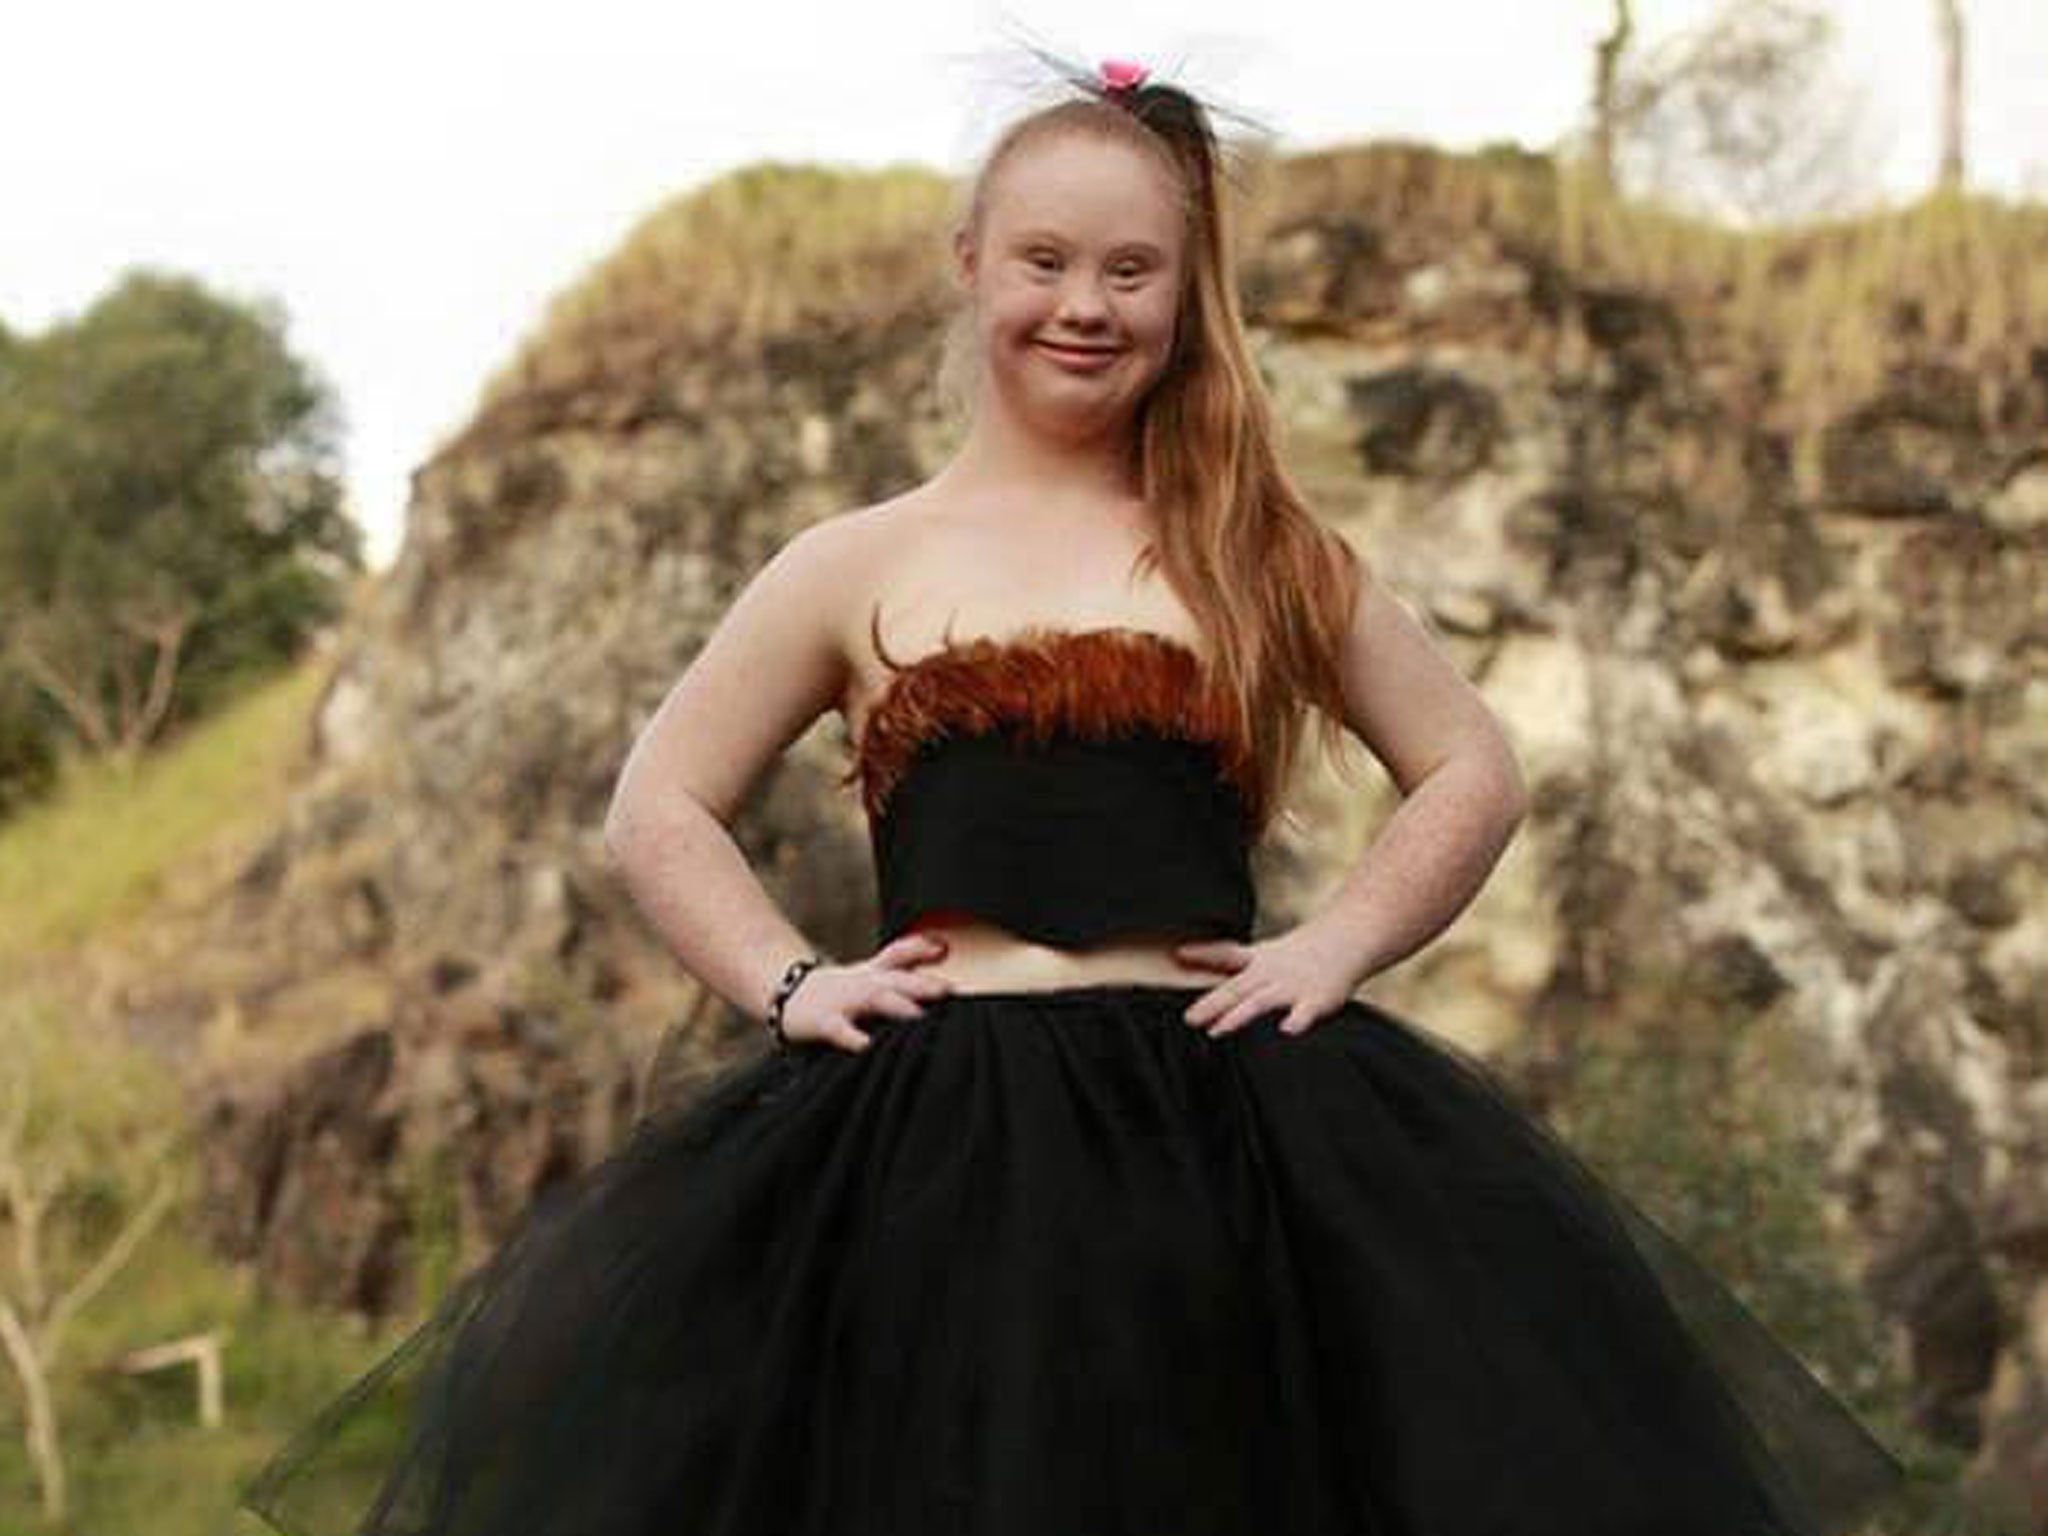 Madeline Stuart Model With Down S Syndrome Will Walk At New York